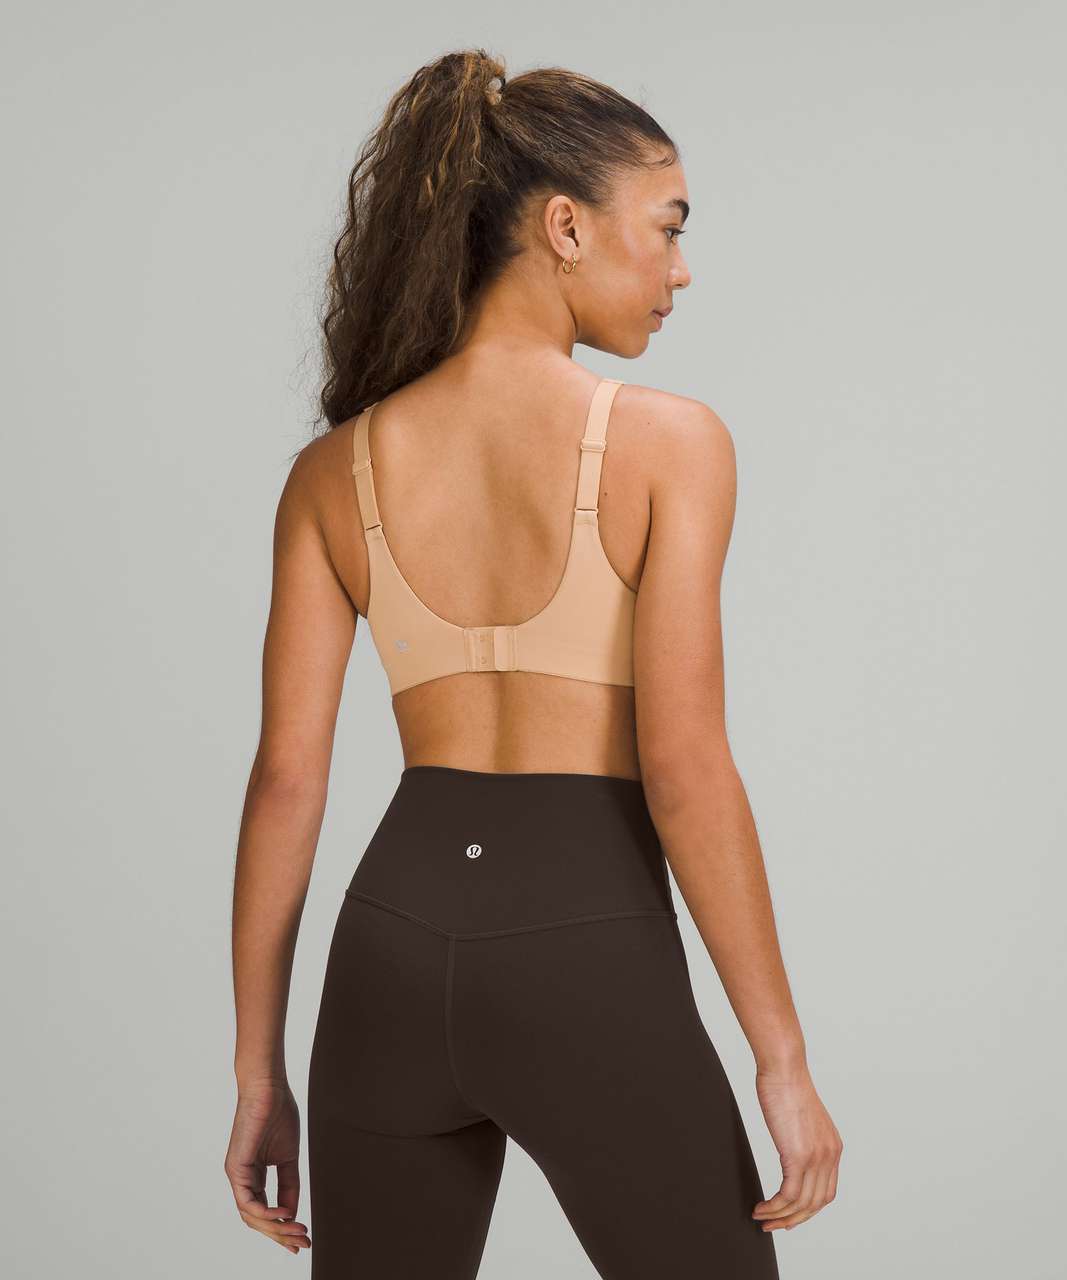 Lululemon In Alignment Straight-Strap Bra *Light Support, C/D Cup - Contour